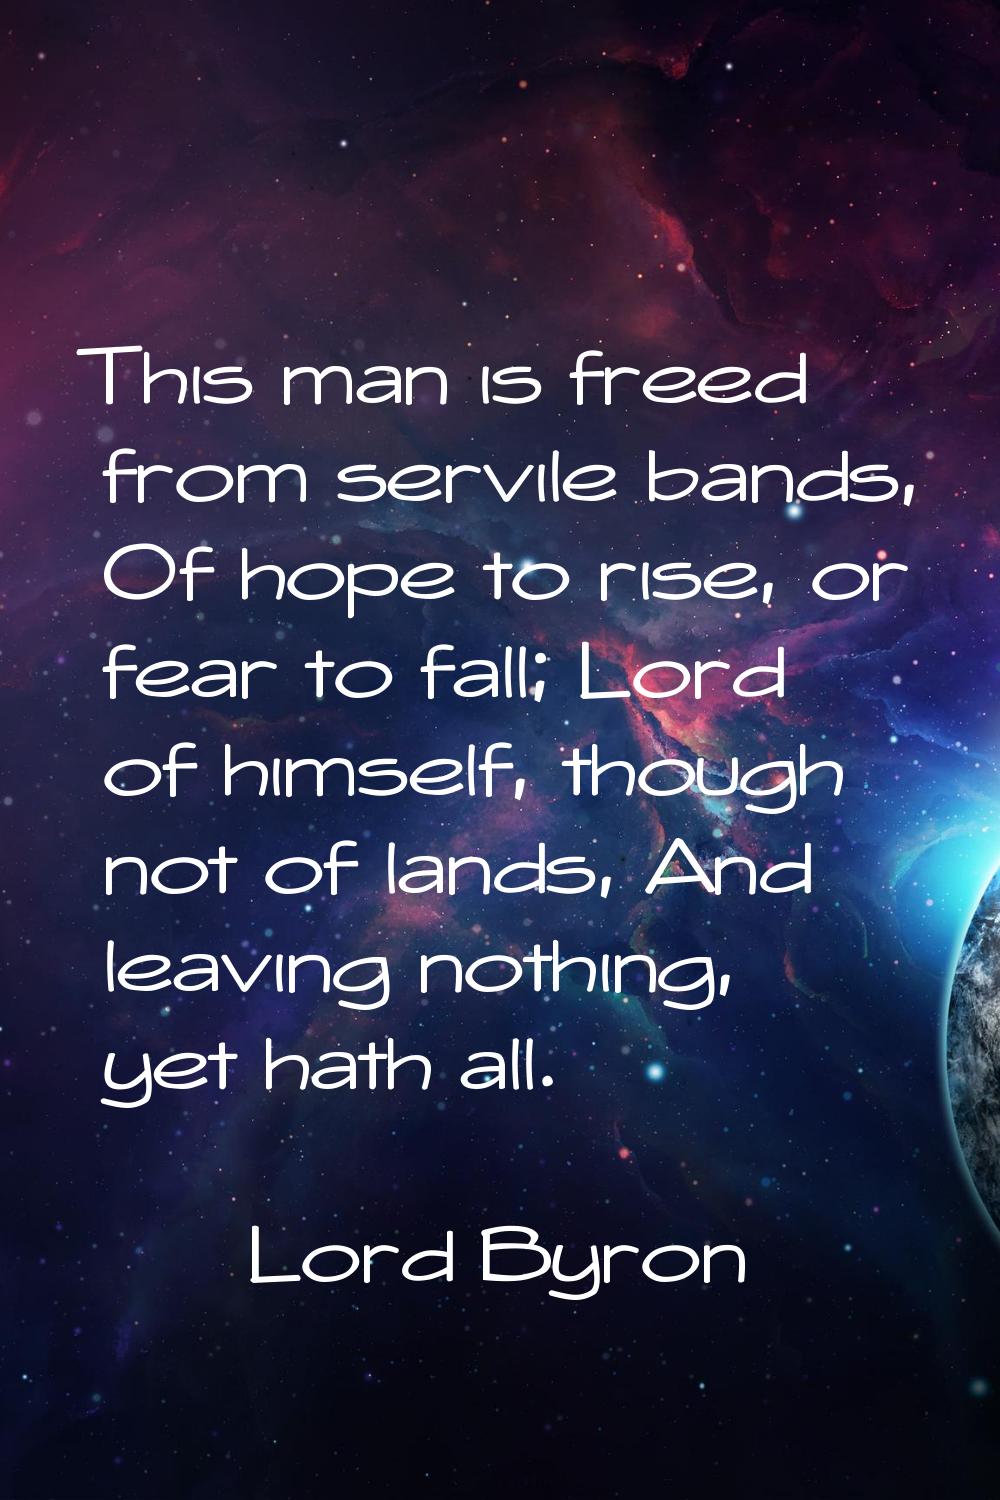 This man is freed from servile bands, Of hope to rise, or fear to fall; Lord of himself, though not